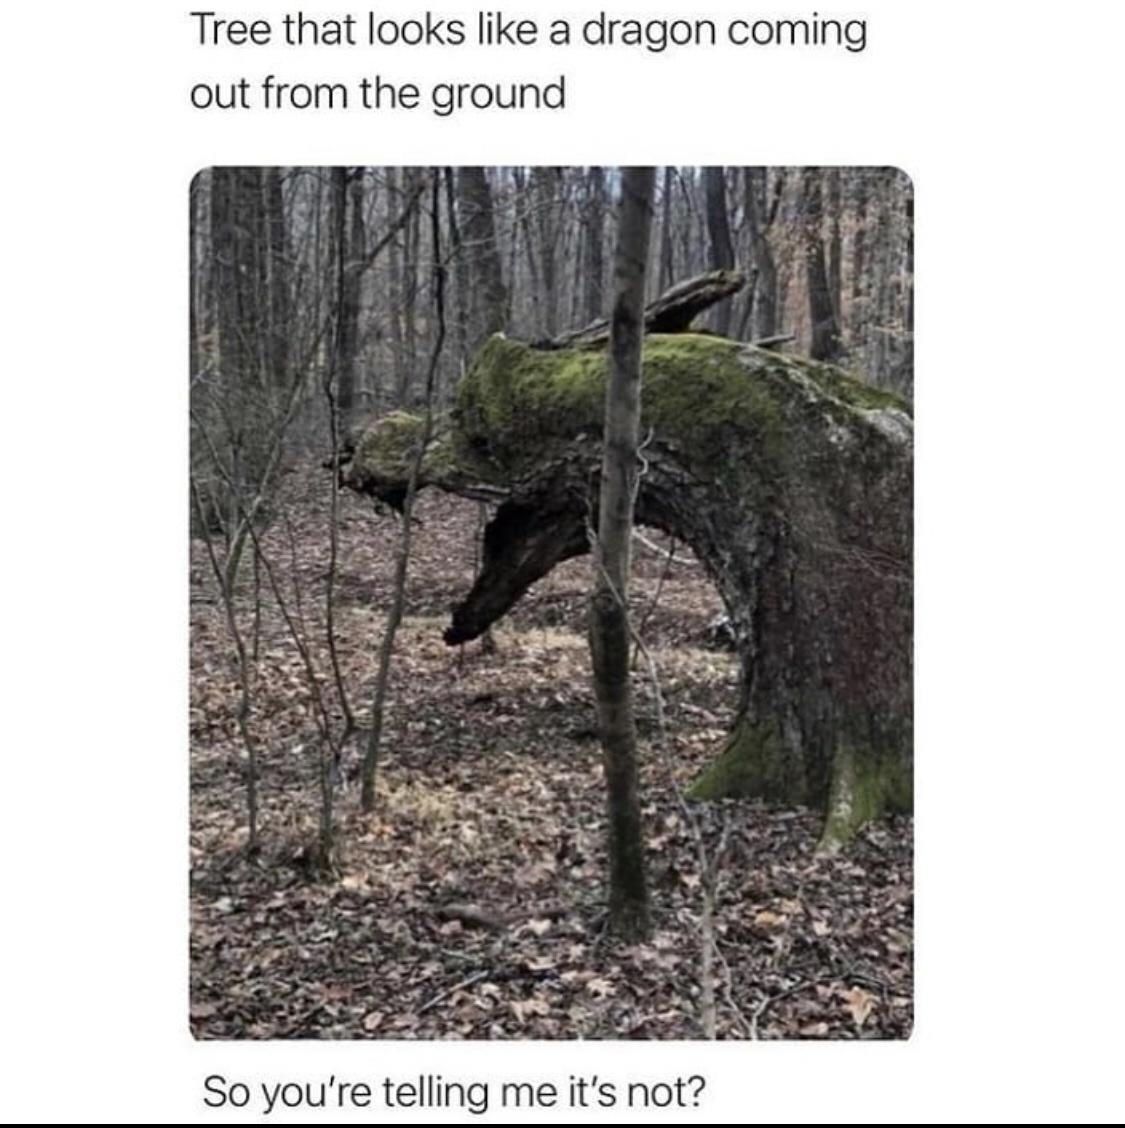 tree that looks like a monster - Tree that looks a dragon coming out from the ground So you're telling me it's not?